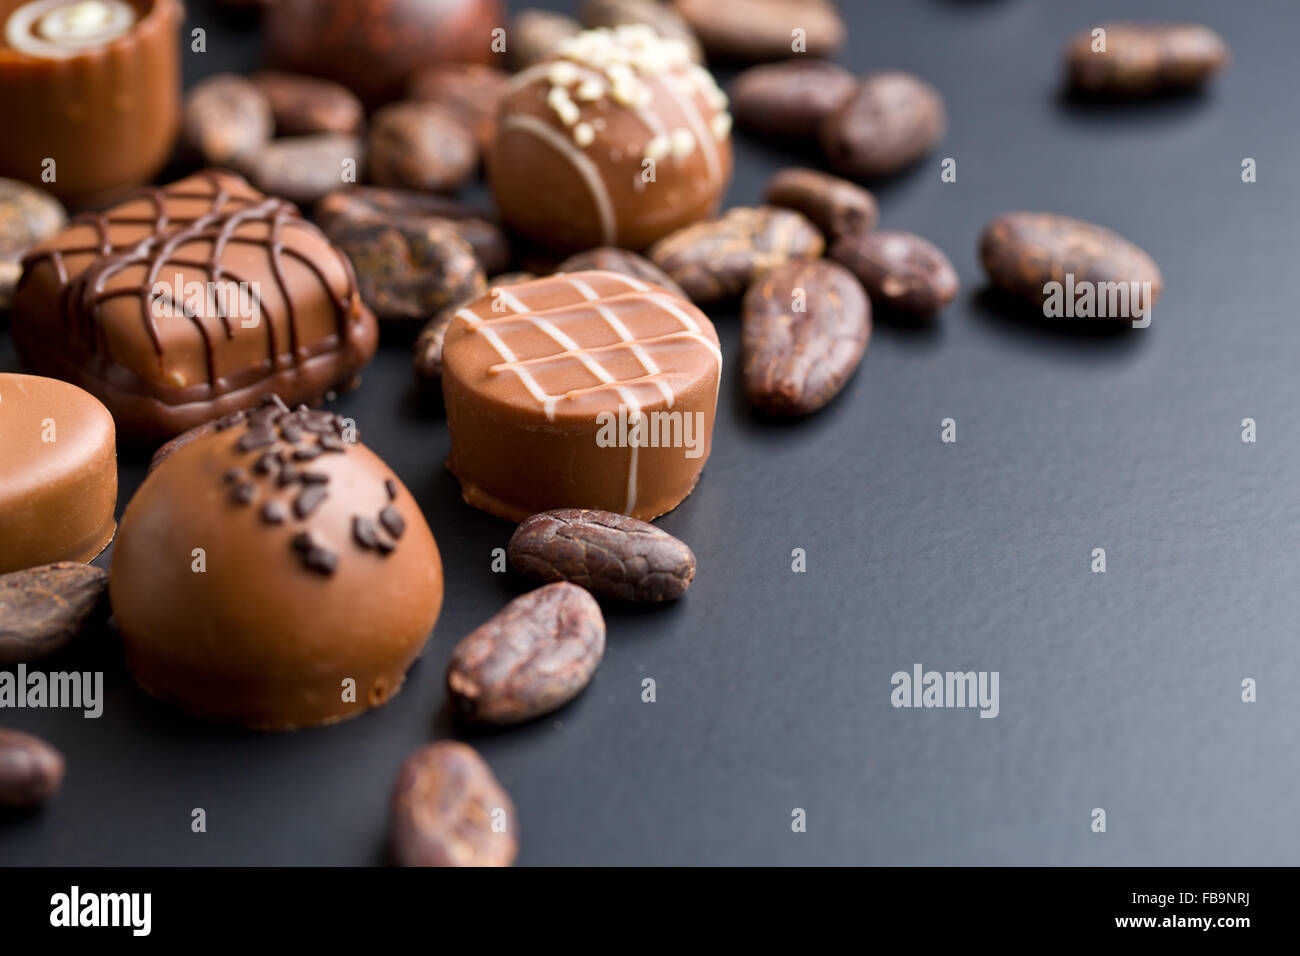 the chocolate pralines and cocoa beans Stock Photo